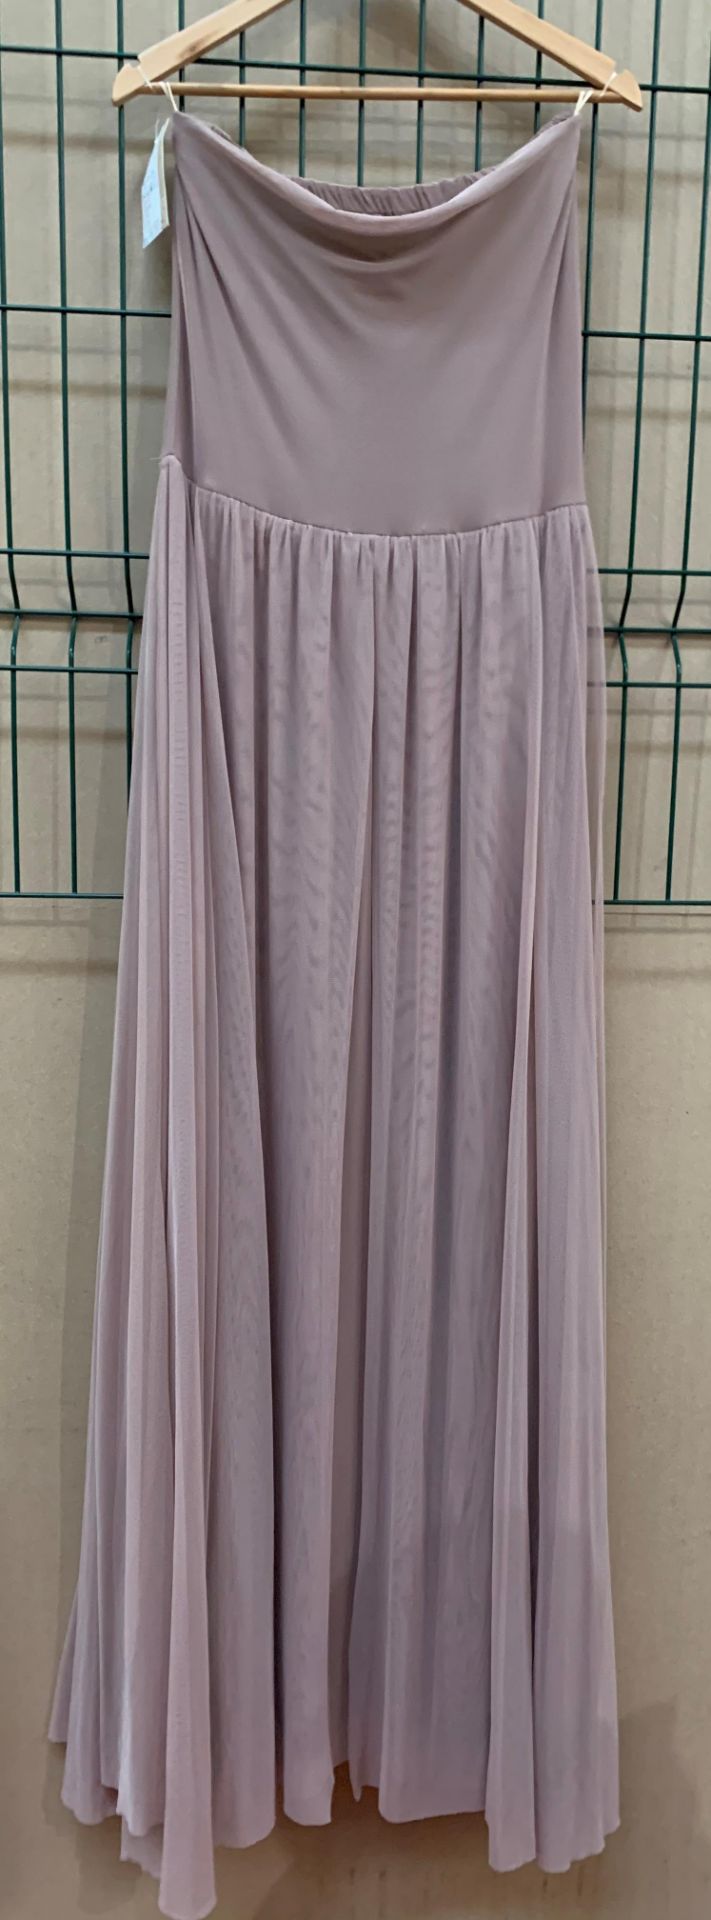 A bridesmaid/prom dress by Worldway, stone, one size,